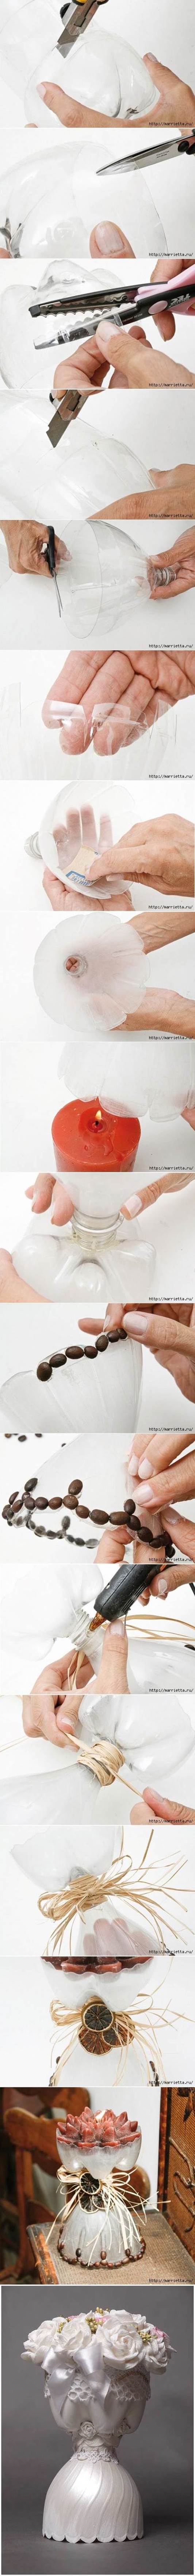 DIY Beautiful Candle Holder from Plastic Bottle 2